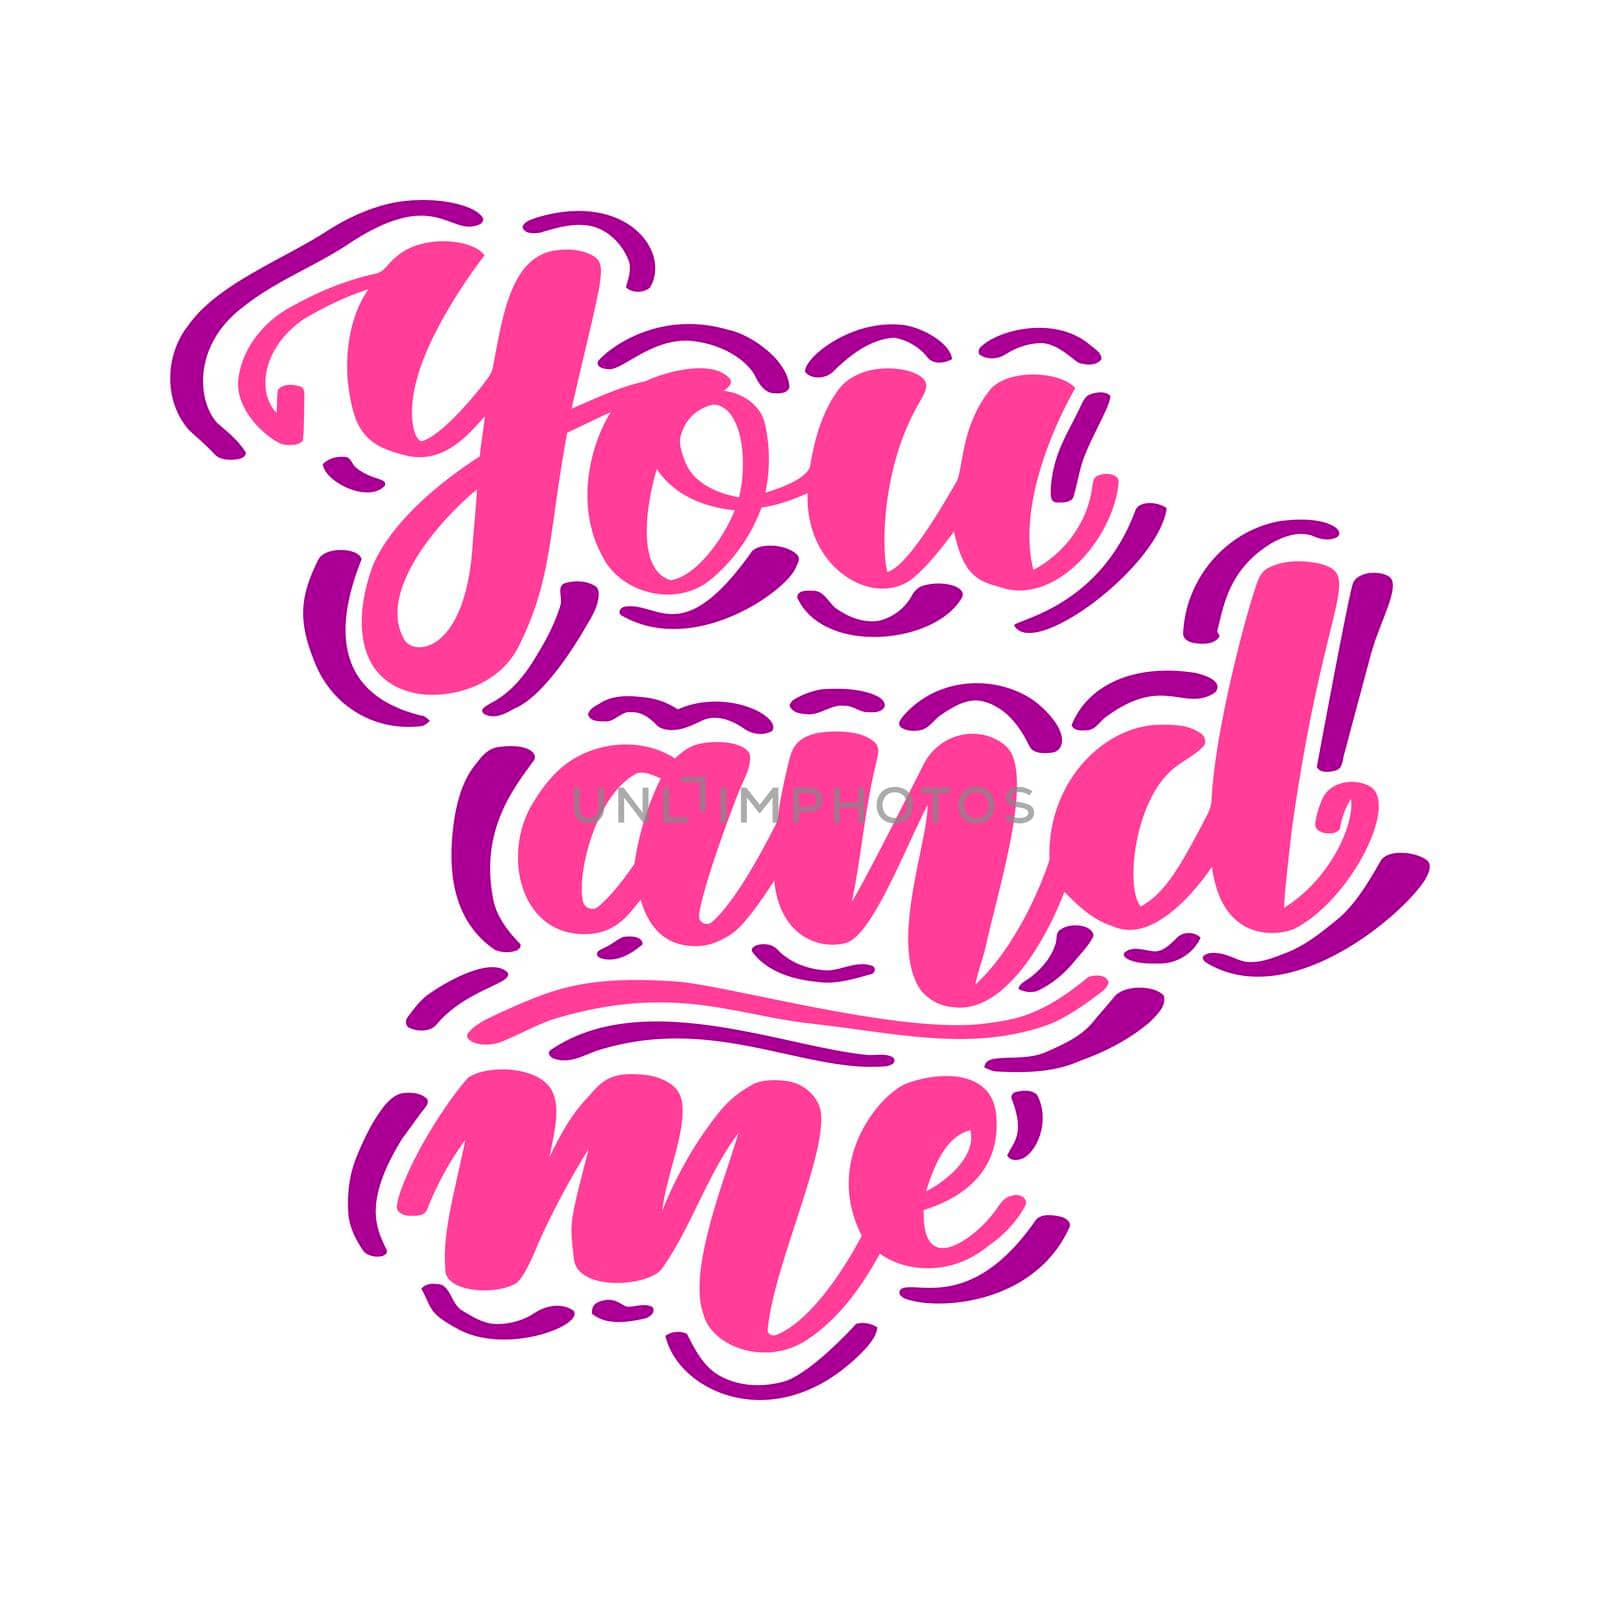 You and me. Romantic handwritten lettering isolated on white background. illustration for posters, cards, print on t-shirts and much more.